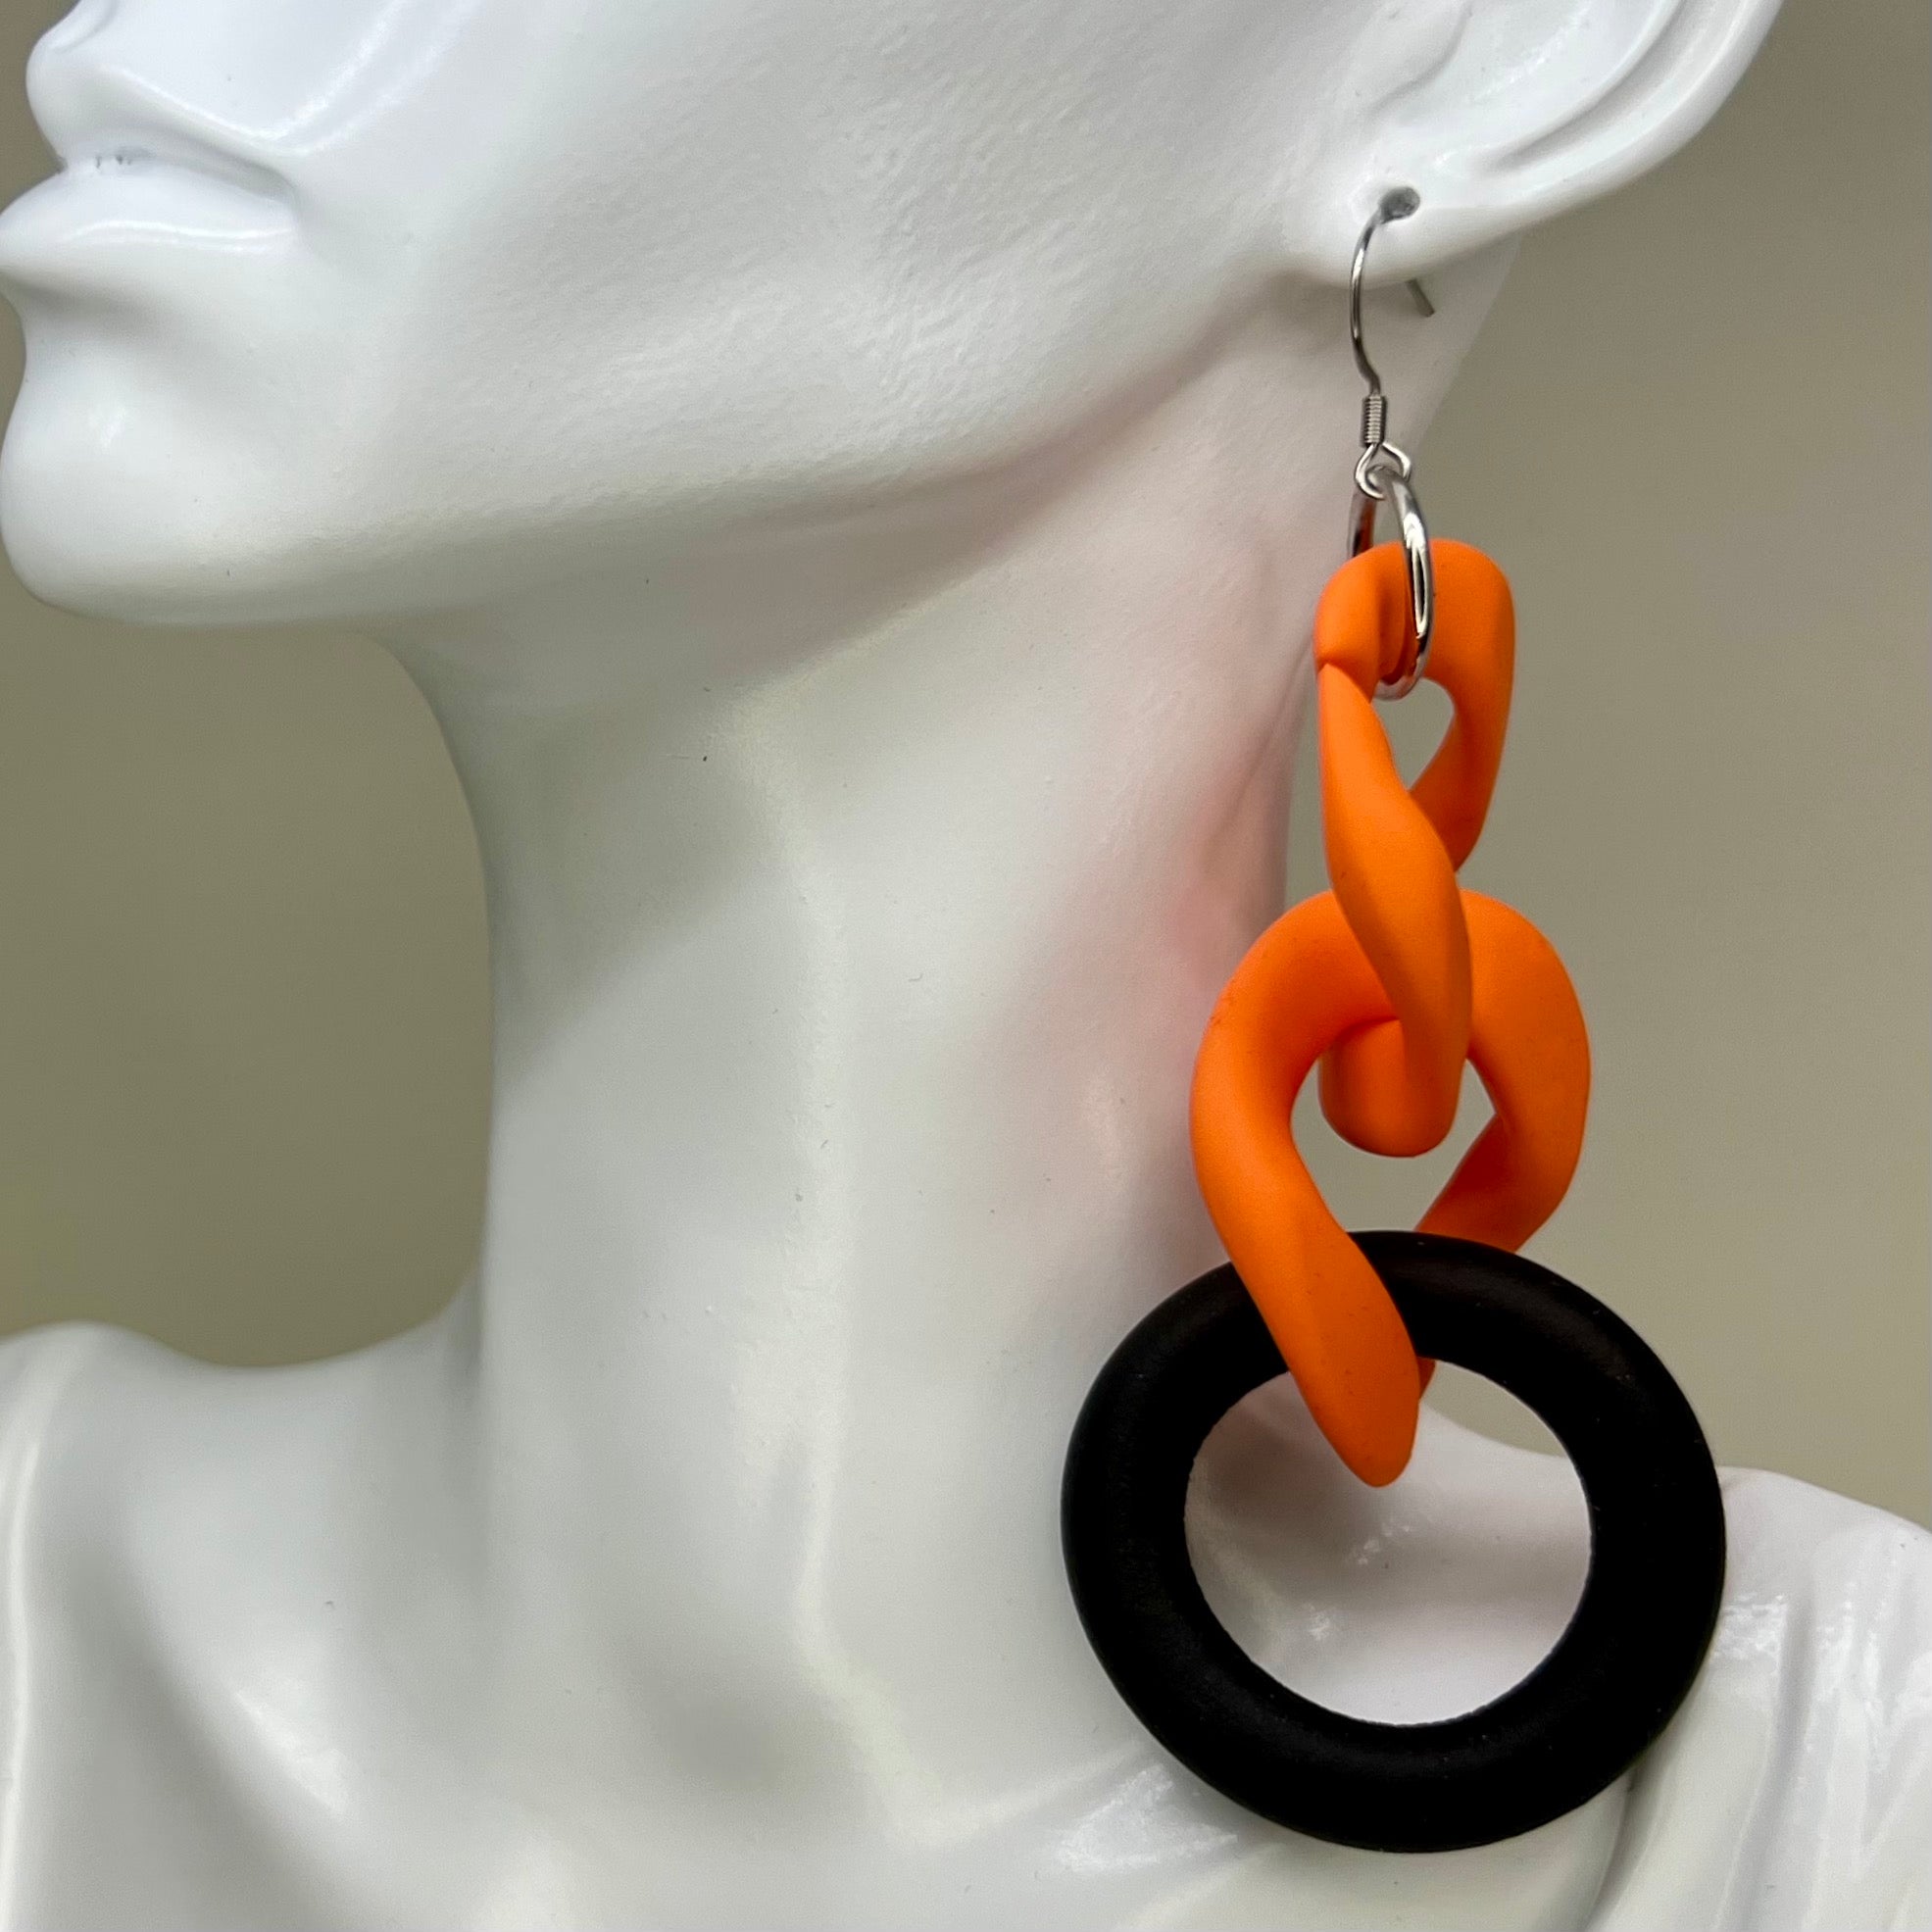 Plastic Chain Link Earrings with Rubber Ring (Assorted Colors) Orange